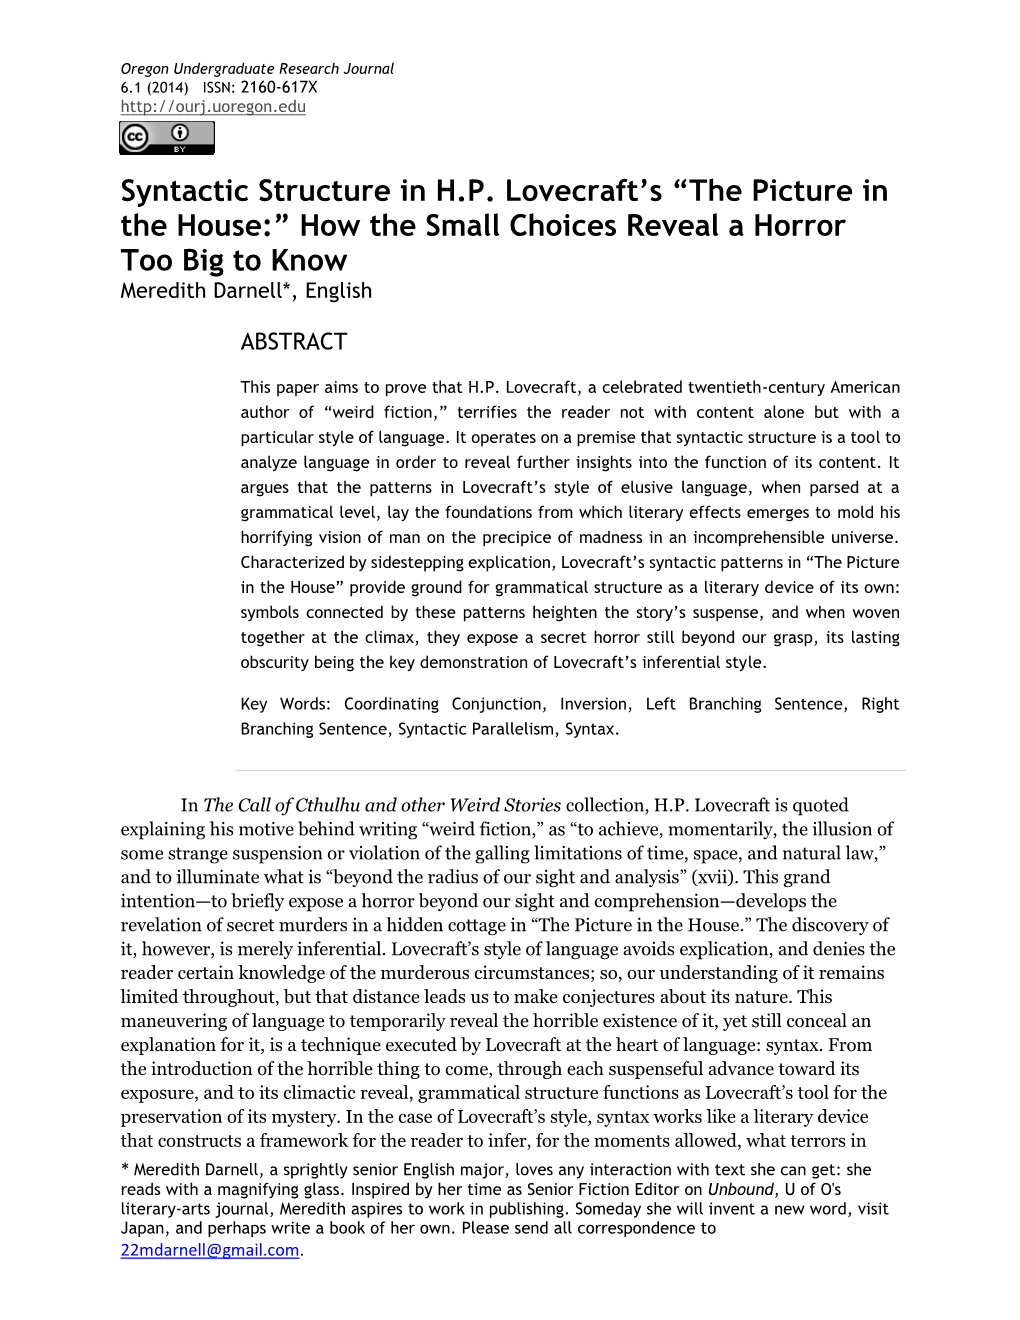 Syntactic Structure in HP Lovecraft's